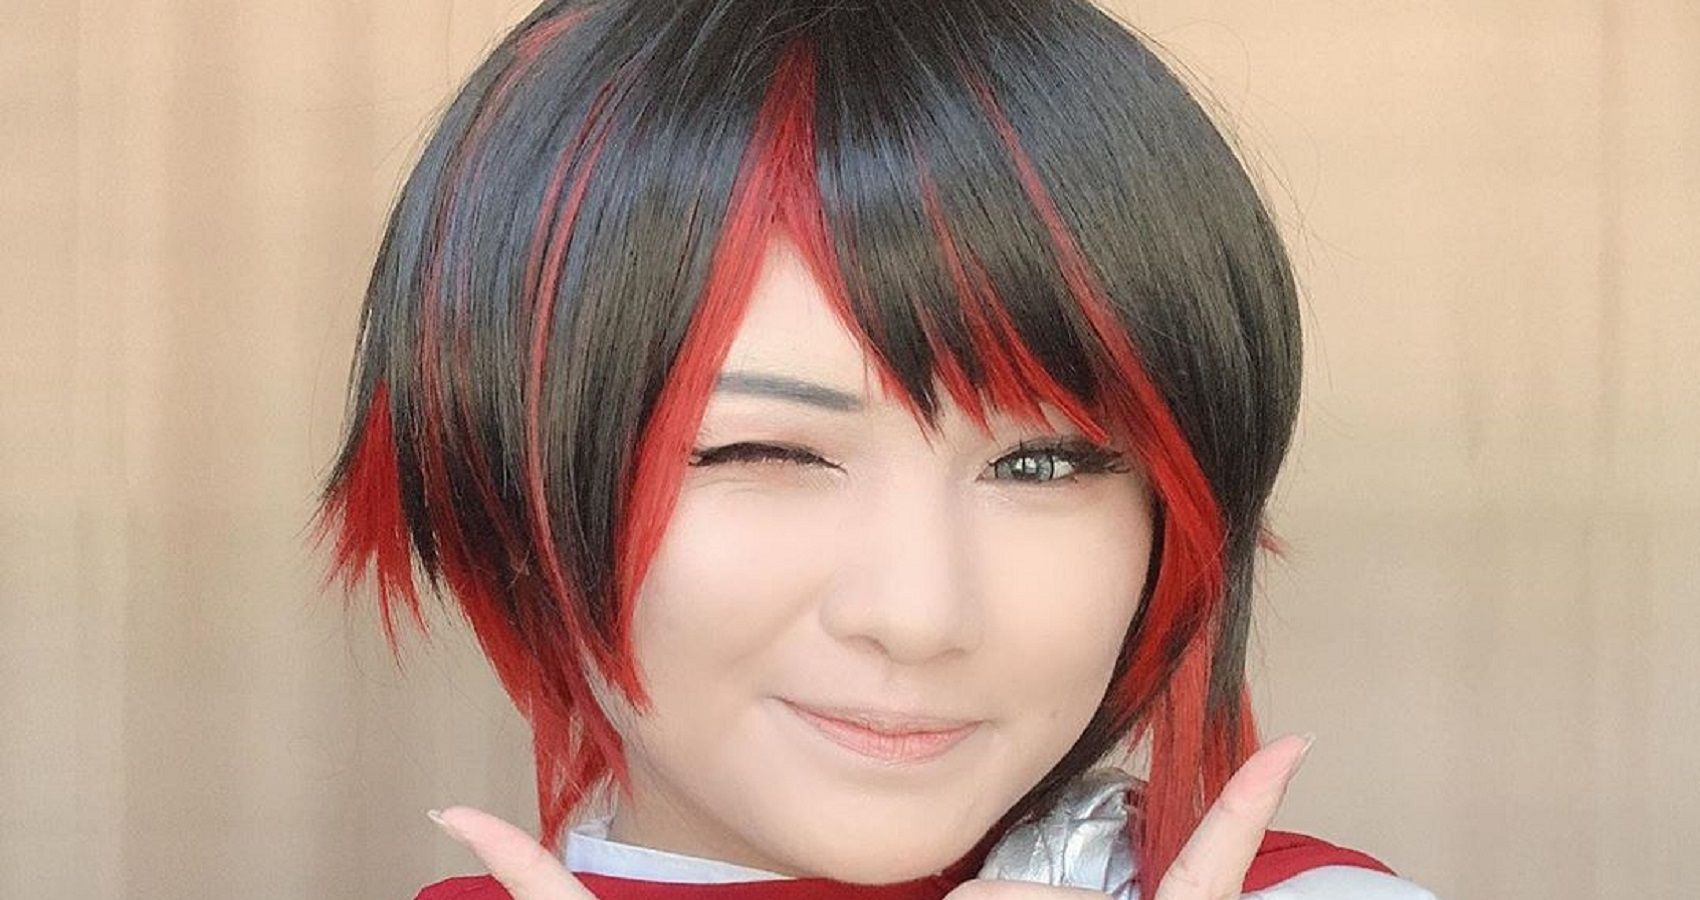 10 Best RWBY Cosplays That Look Exactly